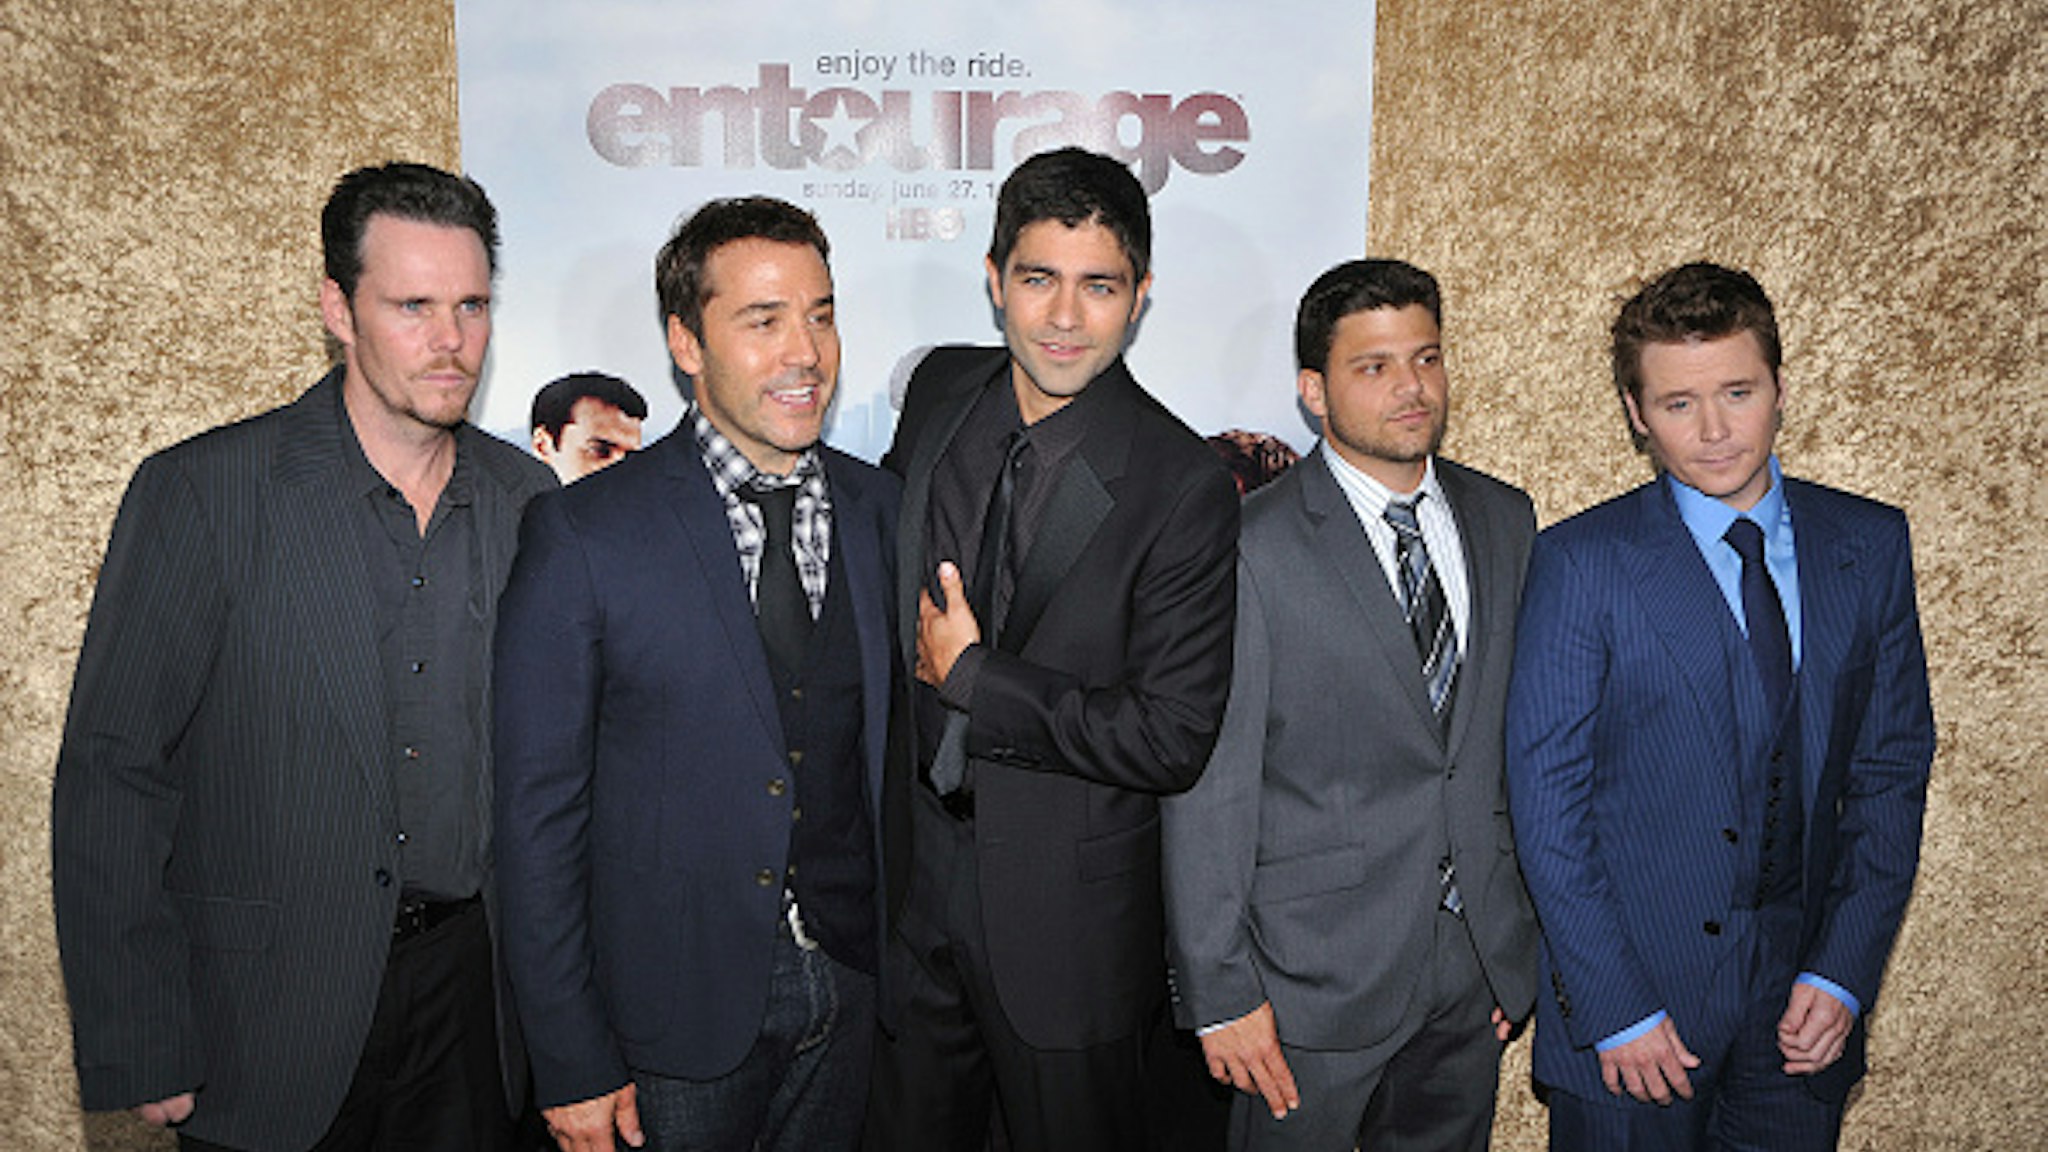 (L-R) Actors Kevin Dillon, Jeremy Piven, Kevin Connolly, Jerry Ferrara and Adrian Grenier arrive at HBO's "Entourage" Season 7 premiere held at the Paramount Theater on the Paramount Studio lot.